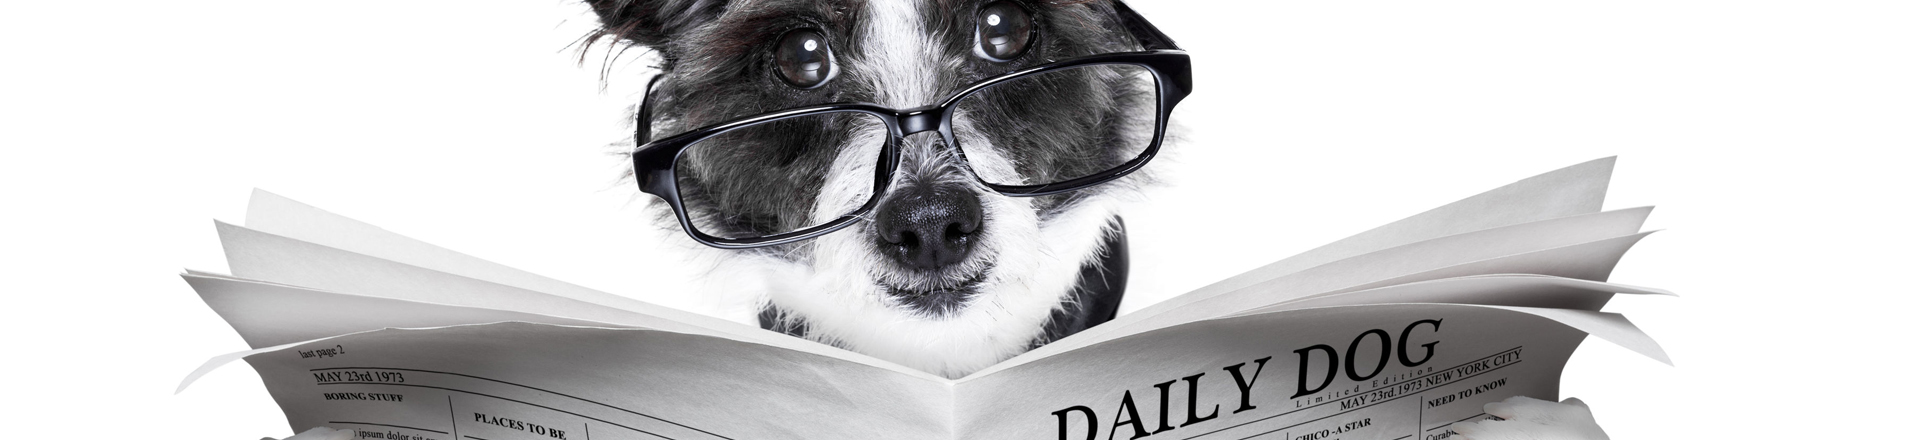 Dog reading the newspaper